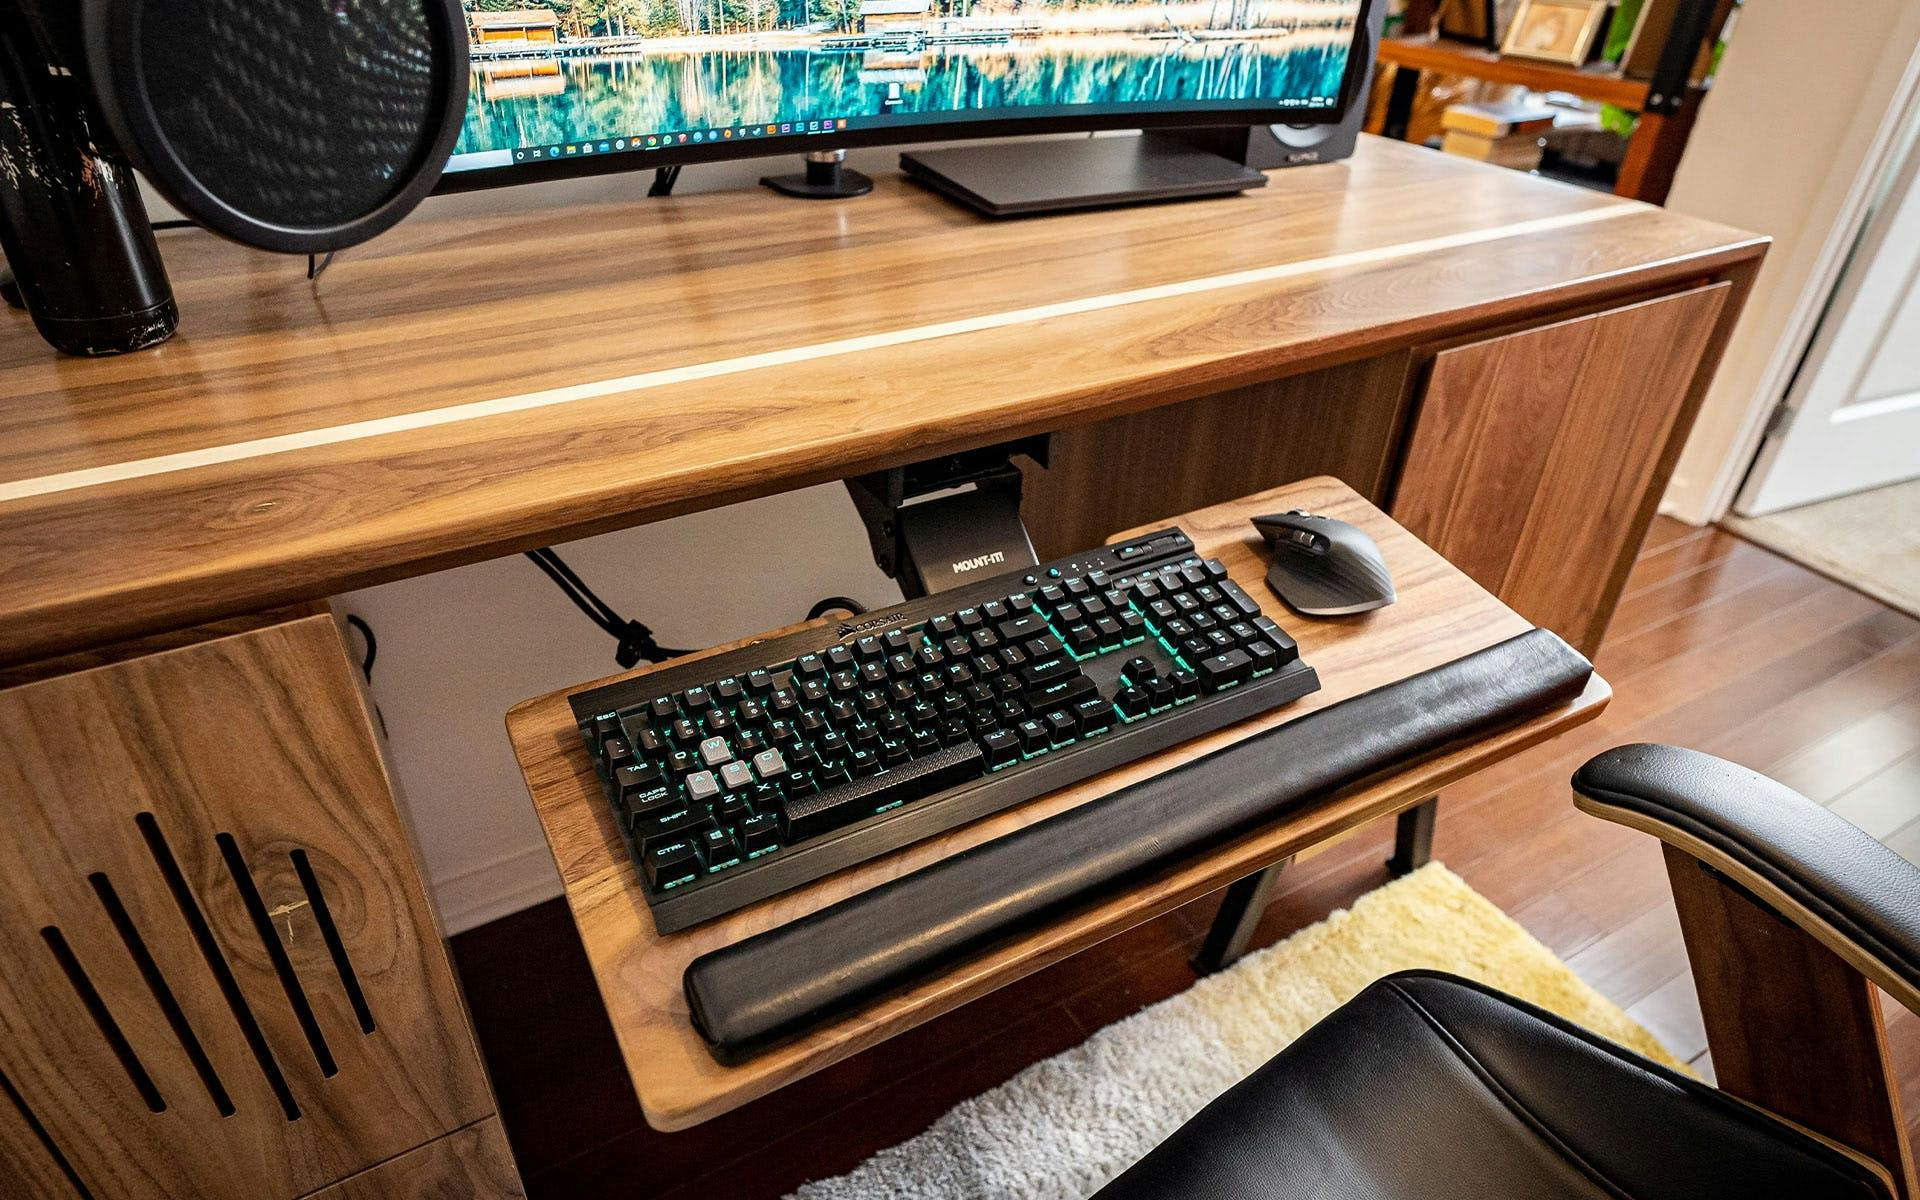 Gamers should keep their hands off keyboard drawers | Credit: zacbuilds.com